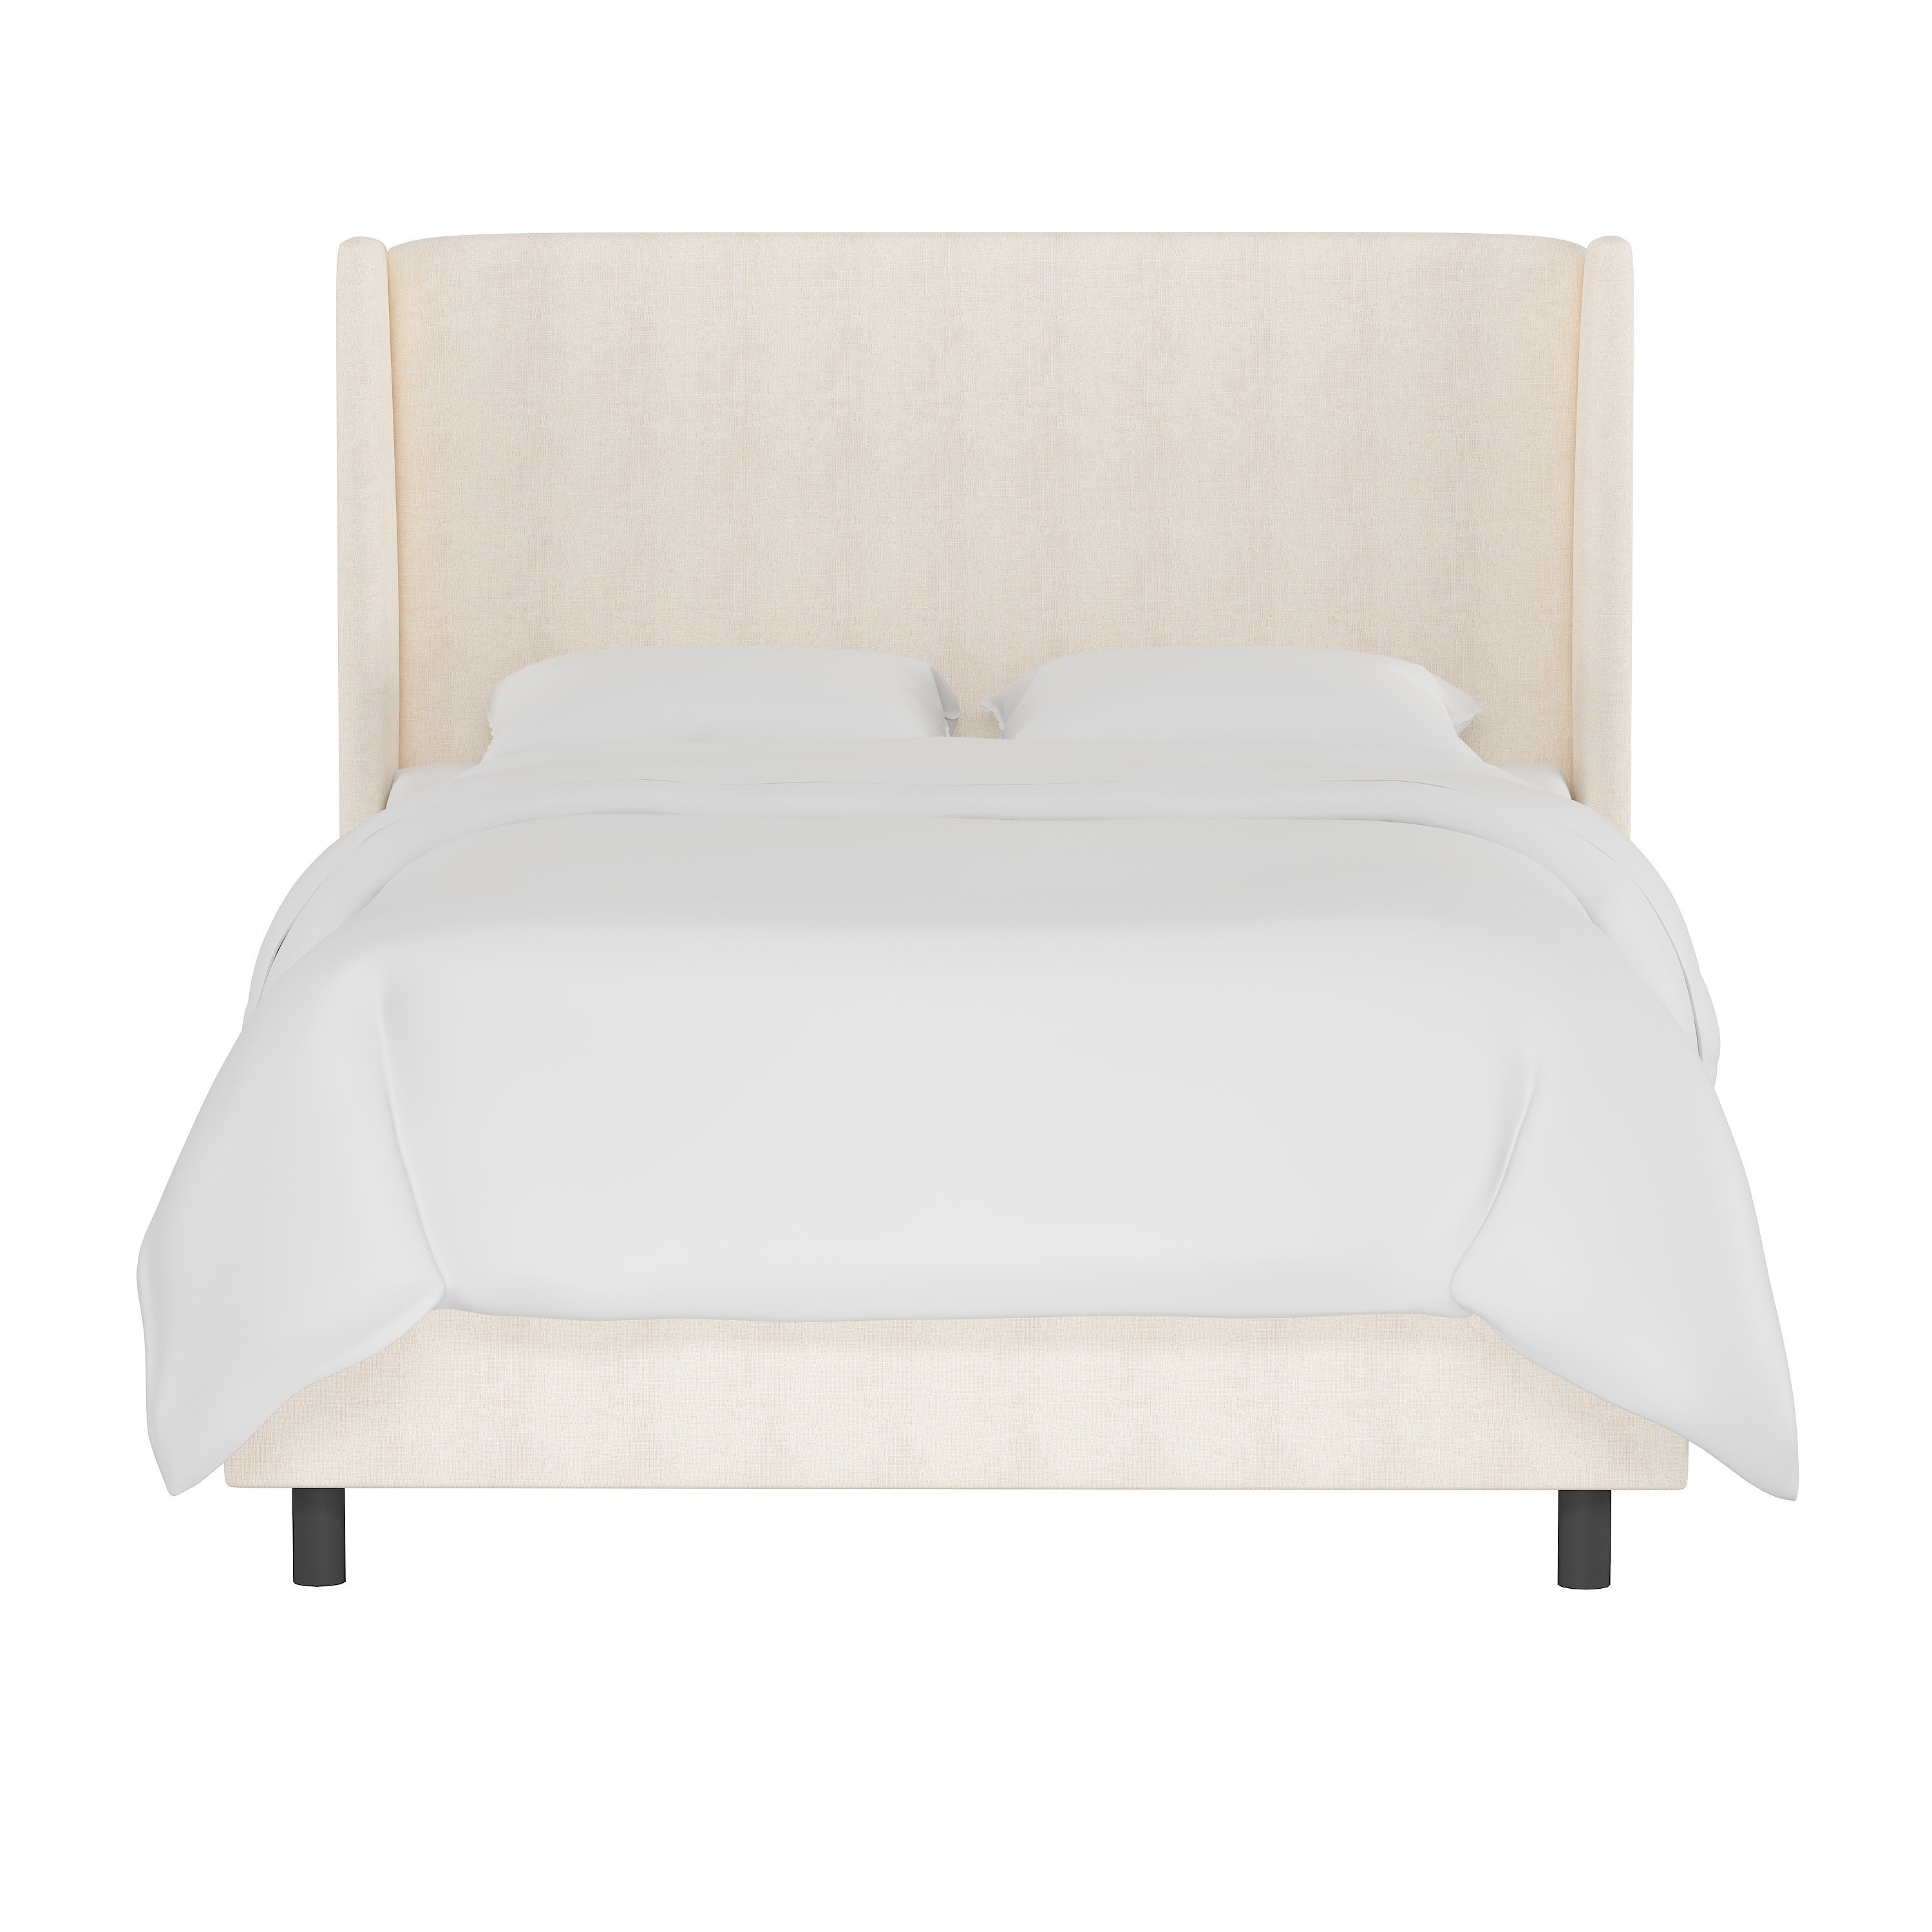 King Lawrence Wingback Bed - Image 1